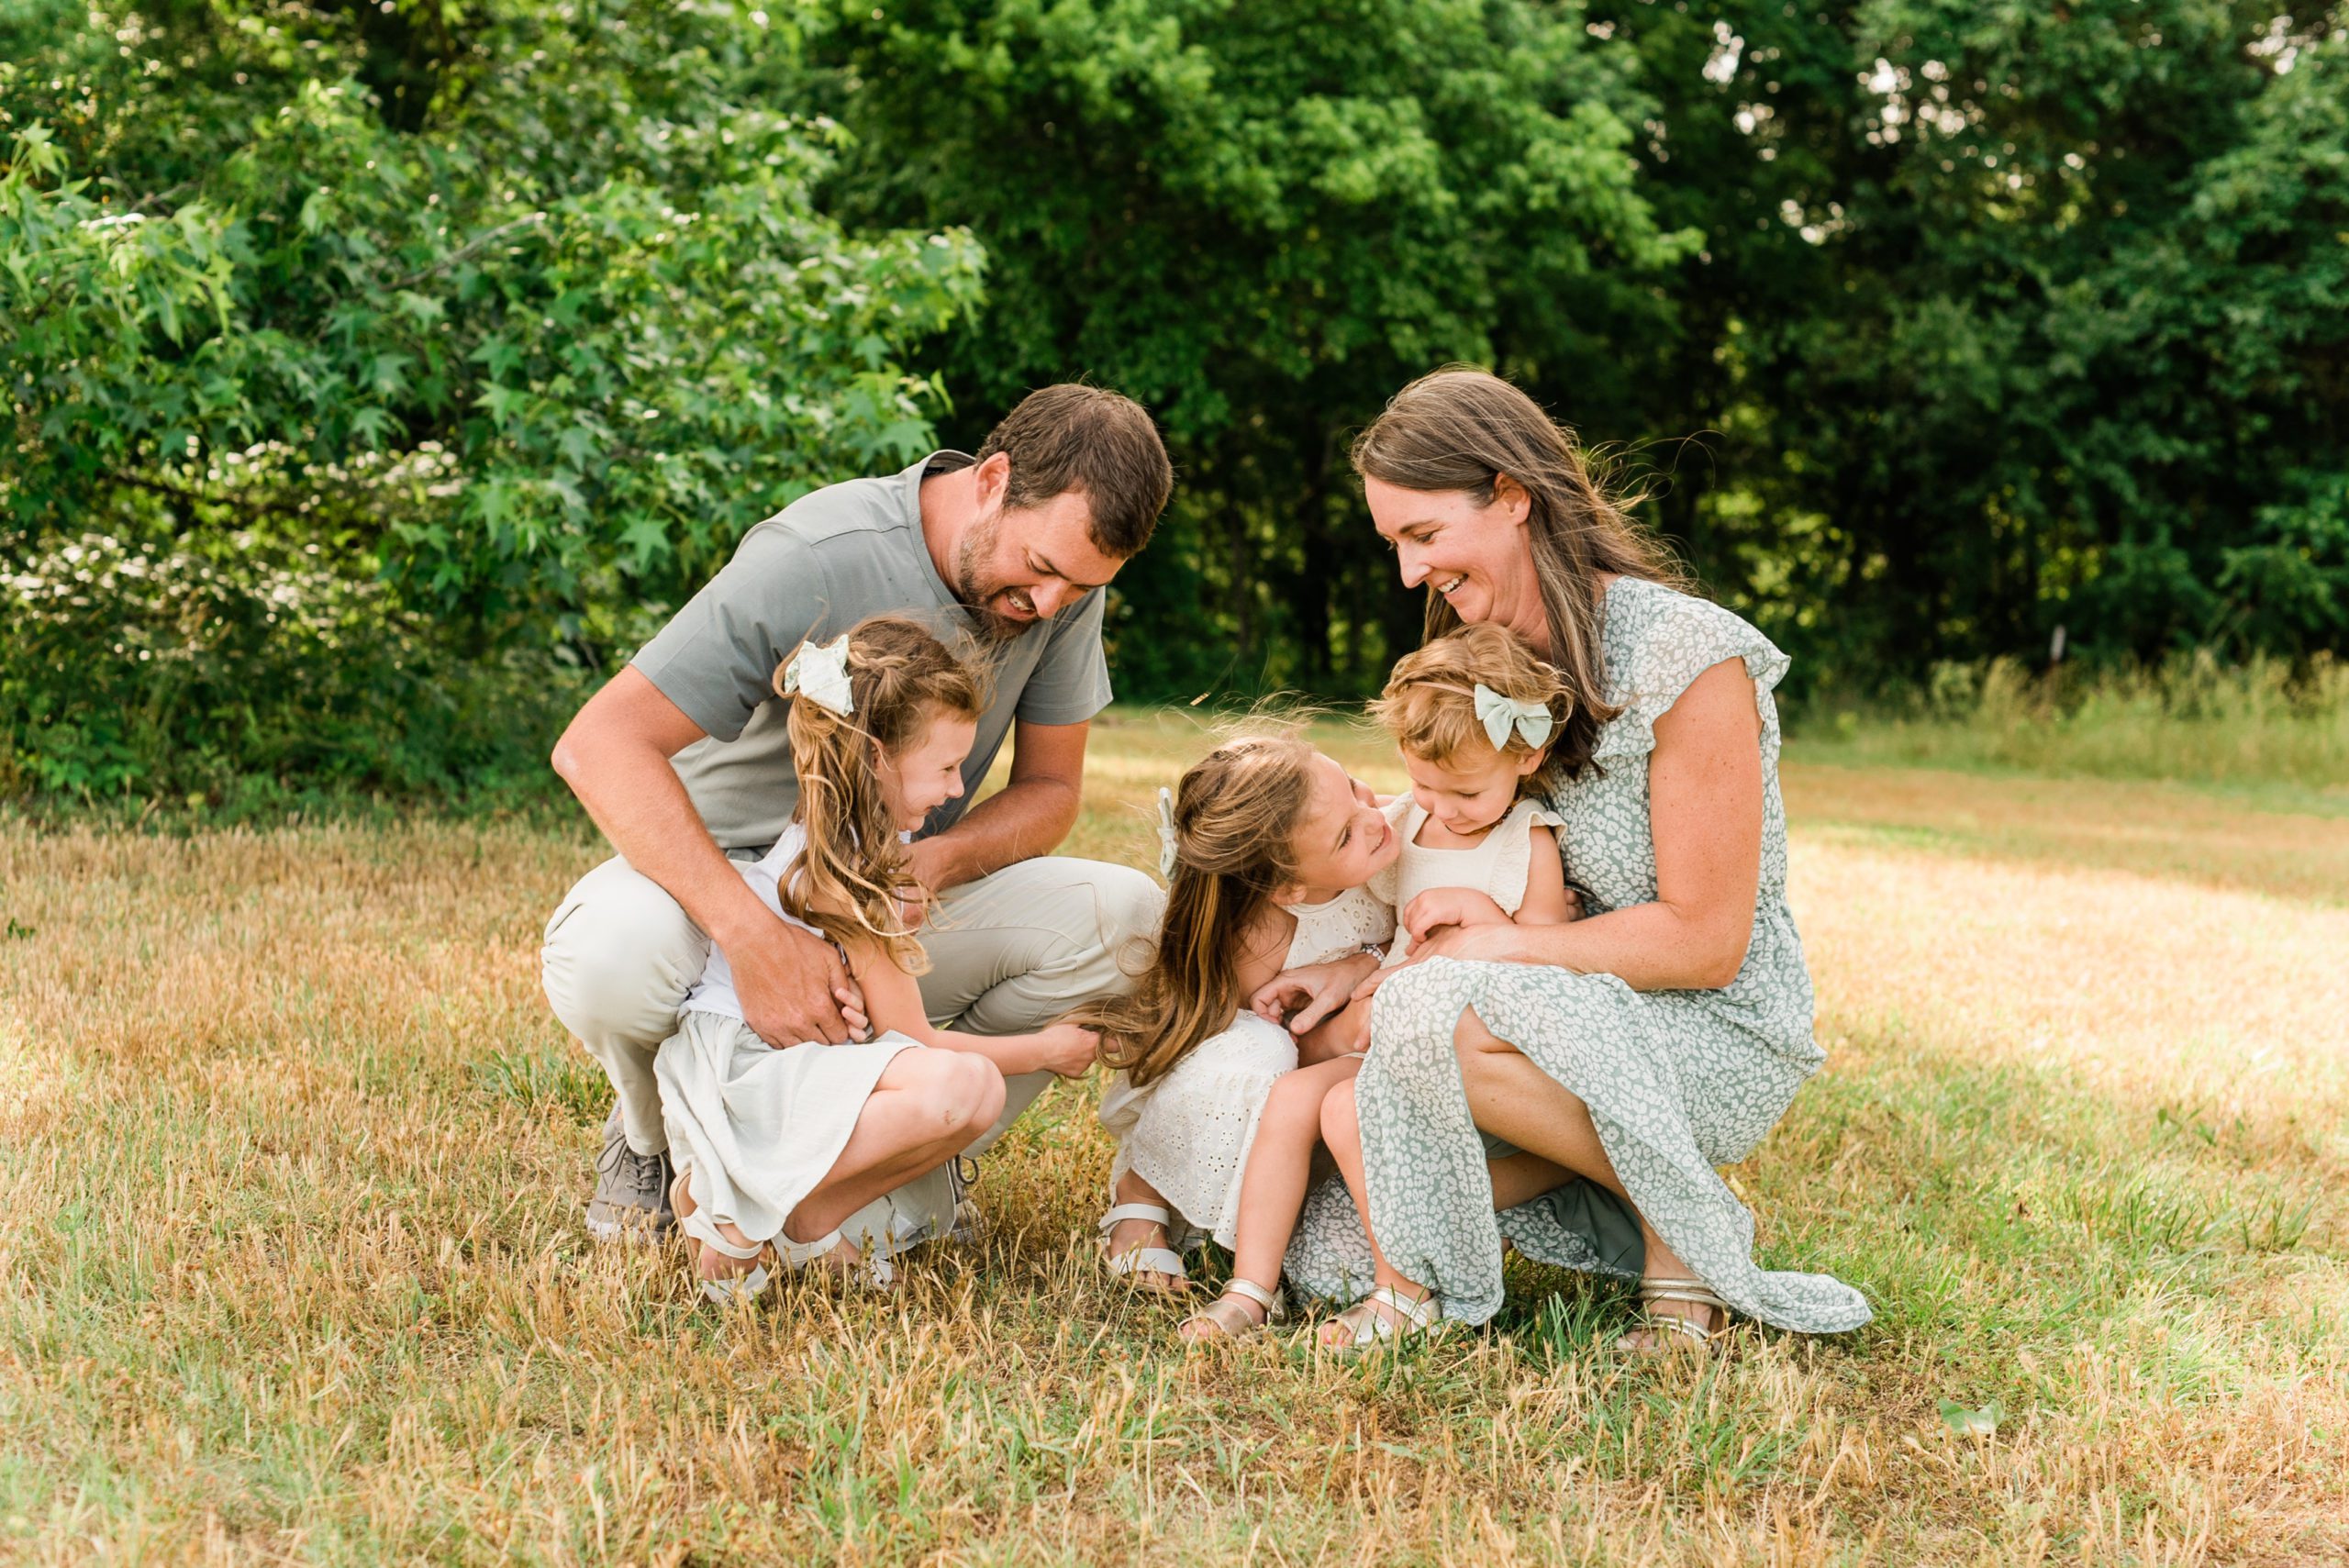 Wake Forest Family Portraits with a lifestyle feel. Parents tickling their daughters